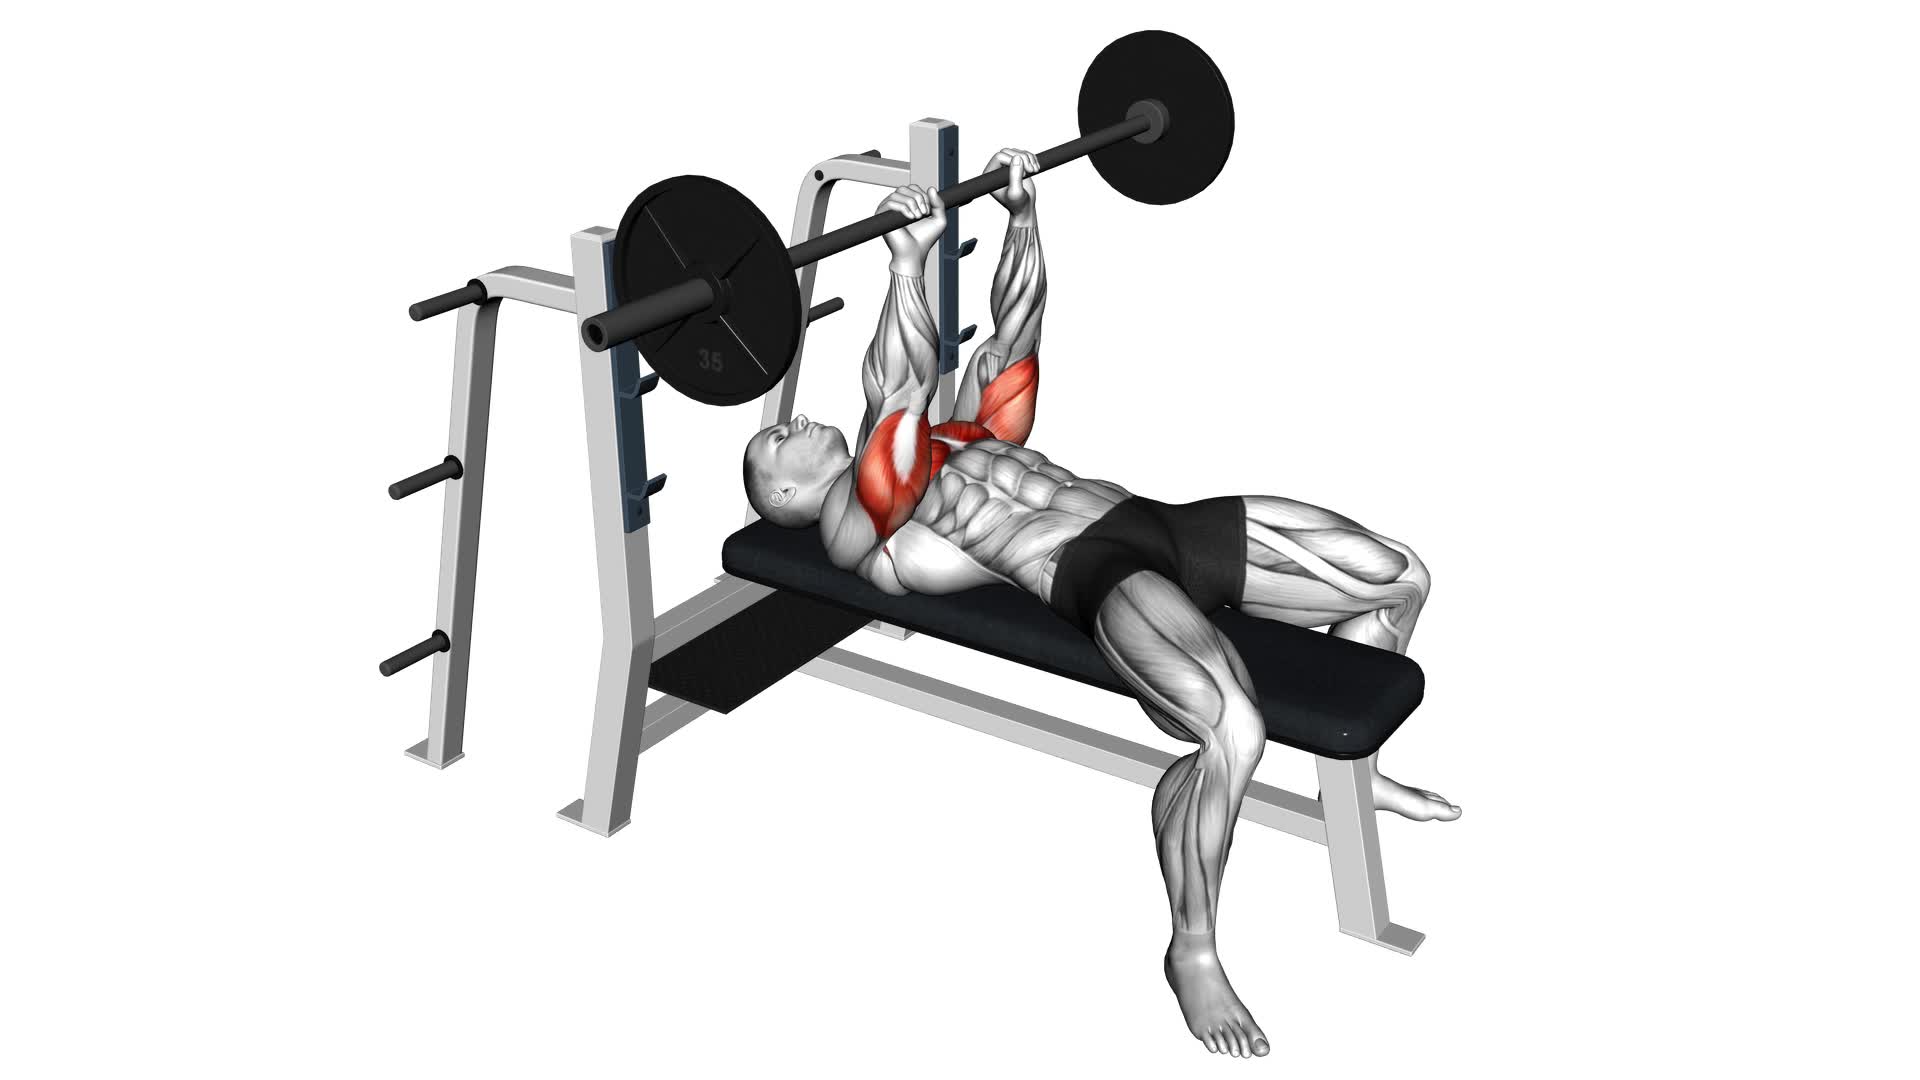 Barbell Close Grip Bench Press - Video Exercise Guide & Tips